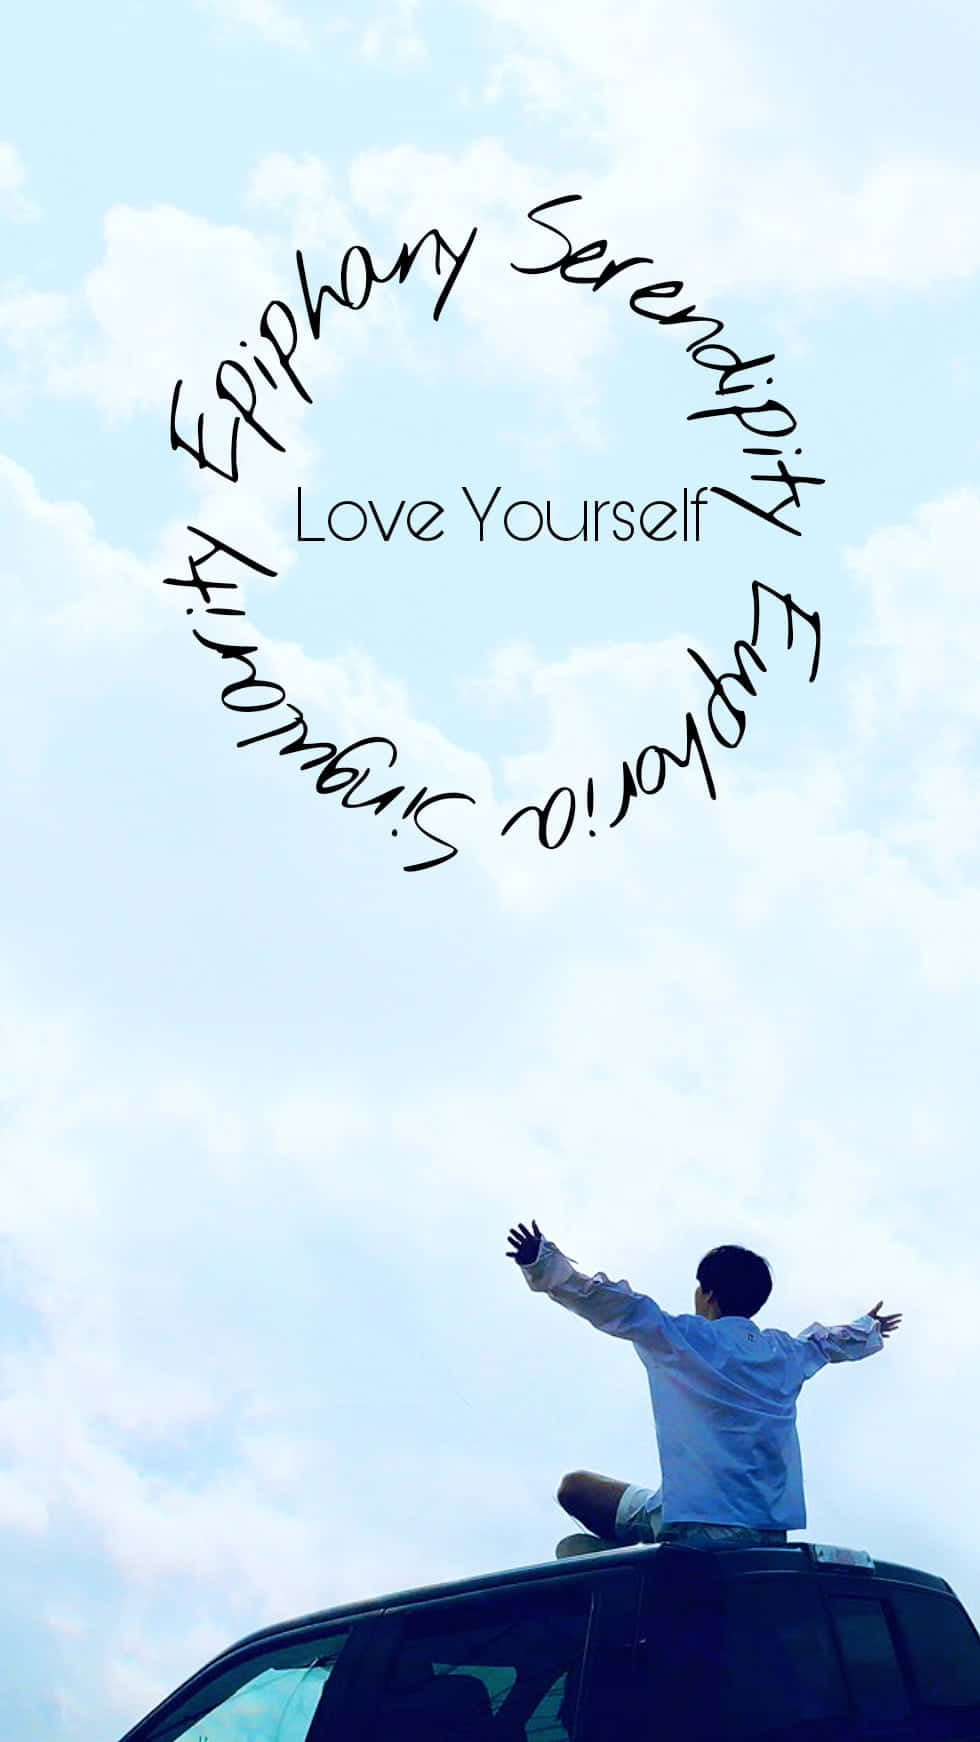 Love Yourself - There's Nothing More Important. Background